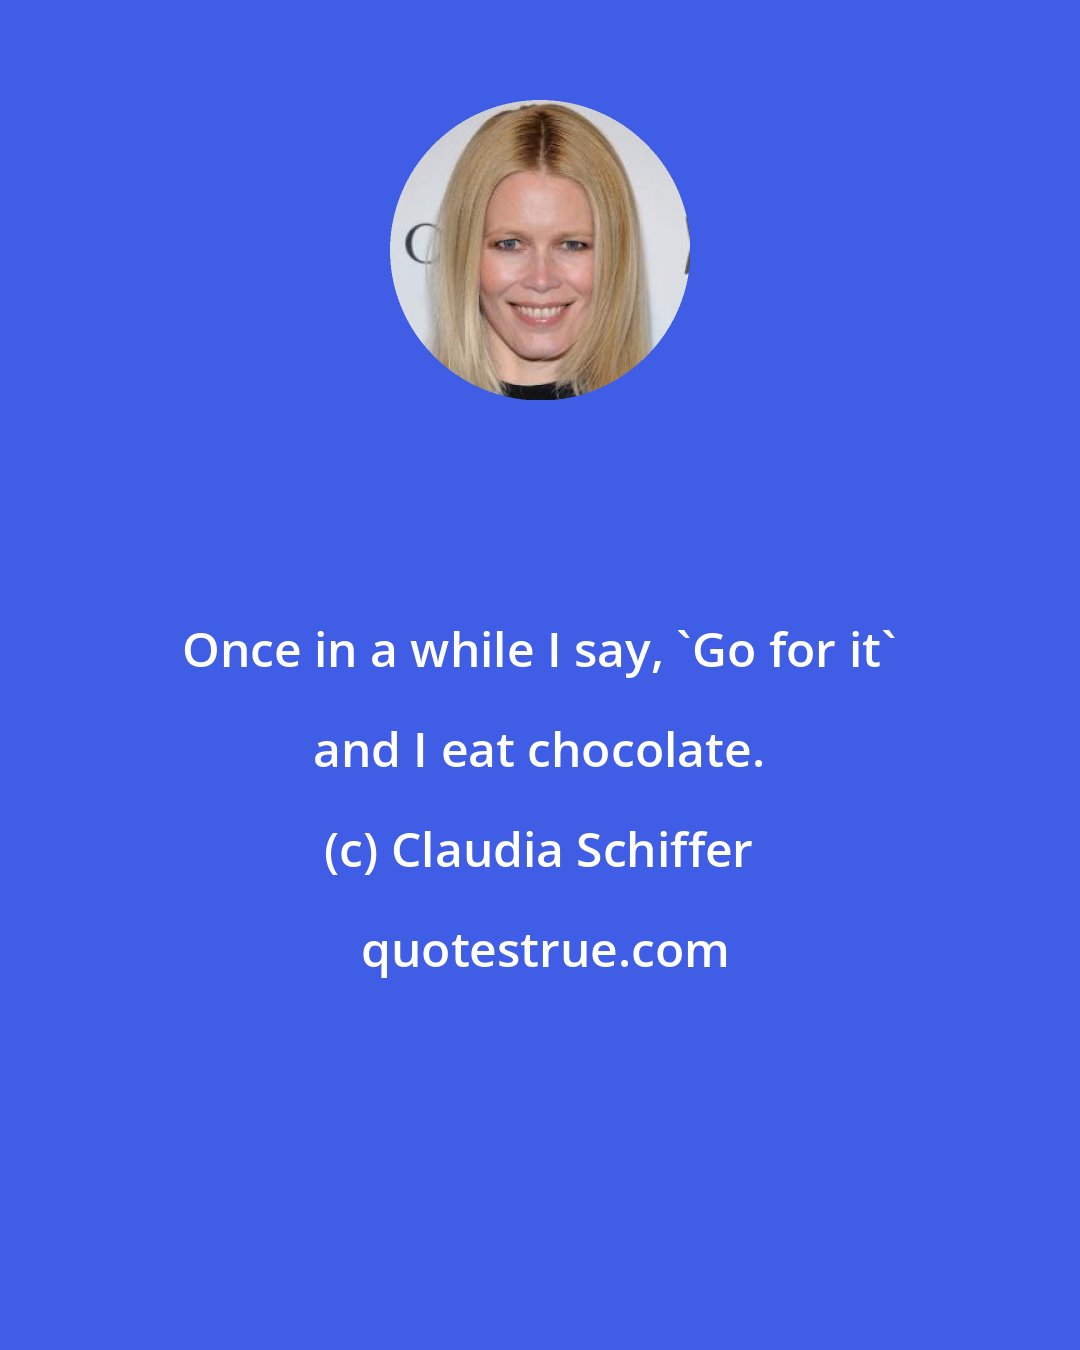 Claudia Schiffer: Once in a while I say, 'Go for it' and I eat chocolate.